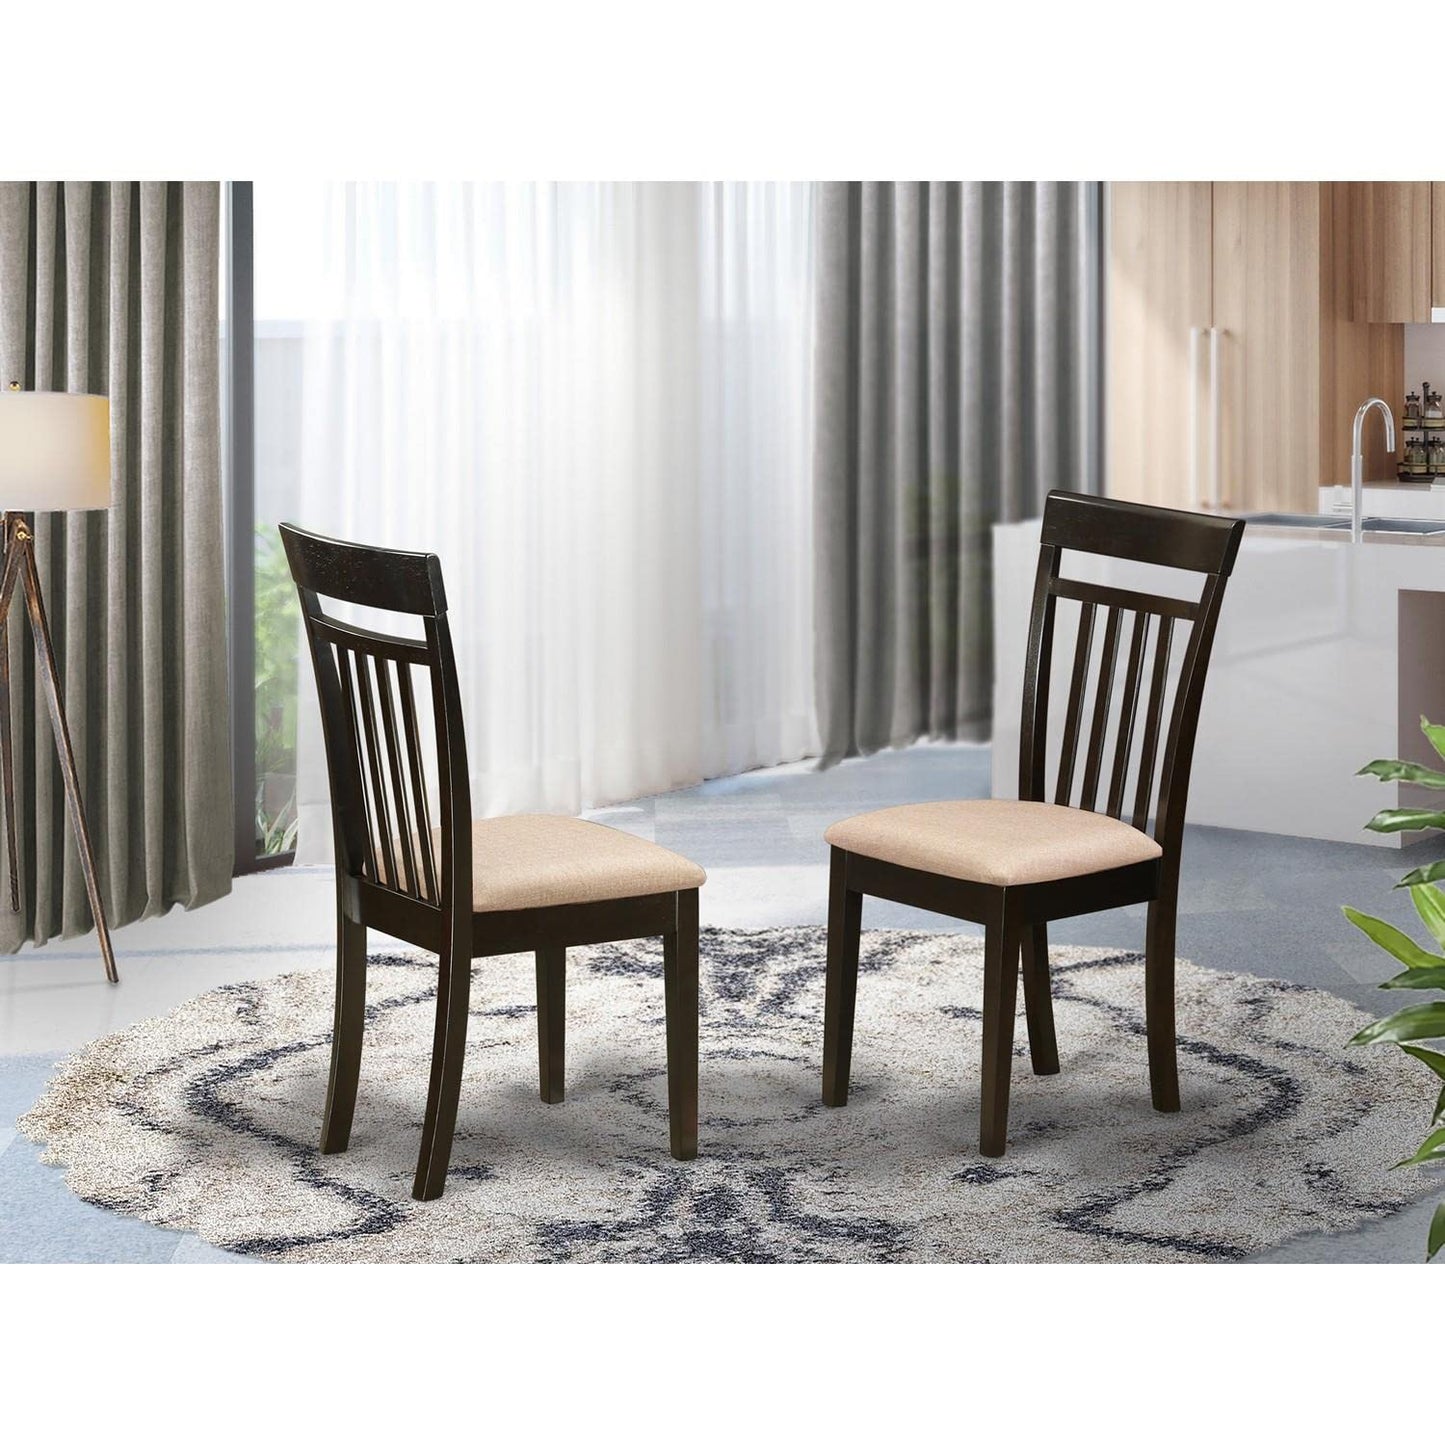 East West Furniture Capri Dining Room Linen Fabric Upholstered Solid Wood Chairs, Set of 2, Cappuccino